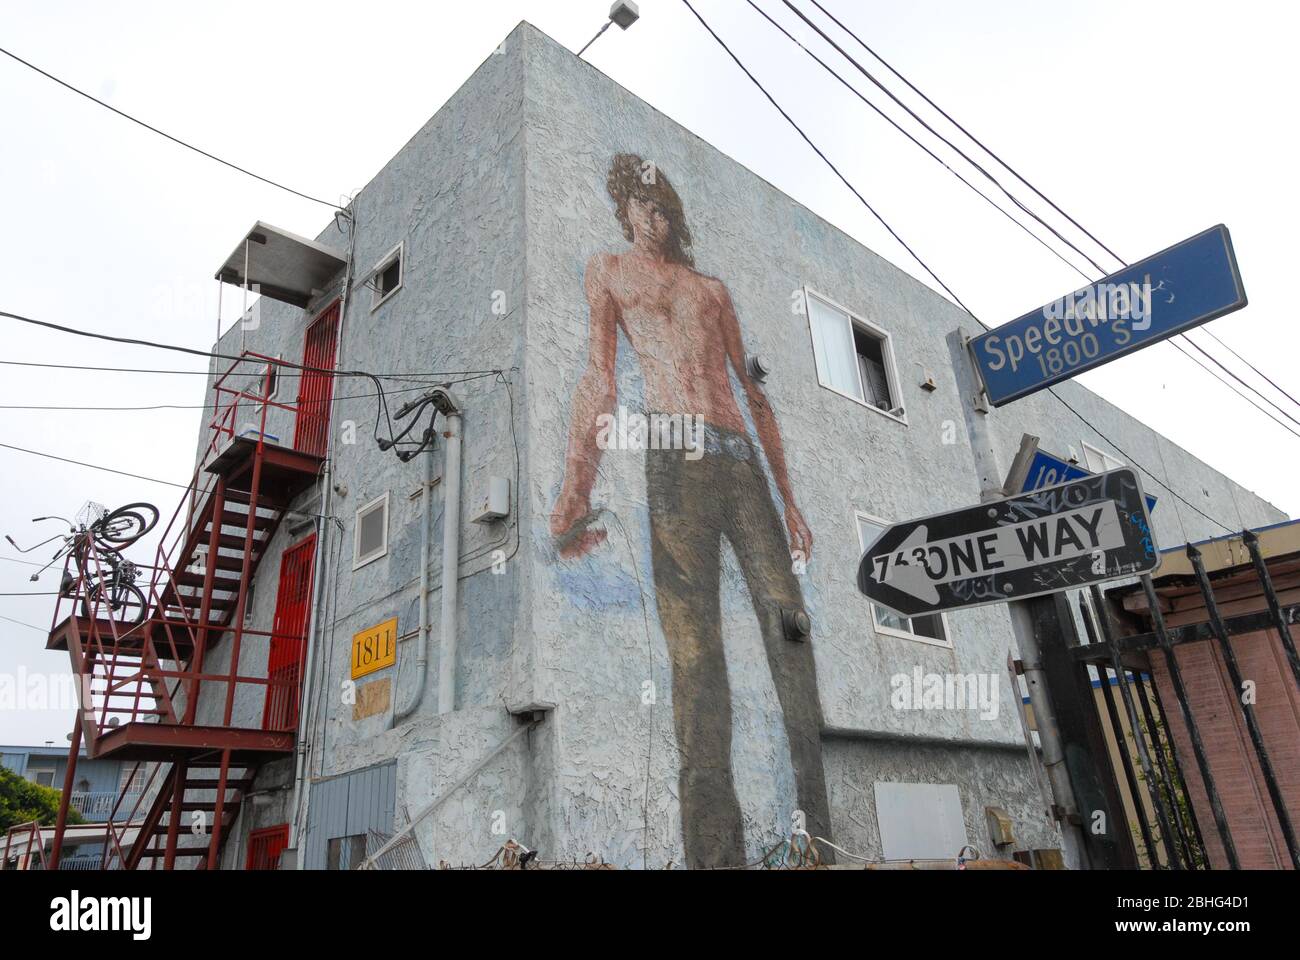 LOS ANGELES, USA - August 2008: Mural of Jim Morrison on a building exterior wall, Venice Beach, California. Painted by Rip Cronk in 1991. Stock Photo